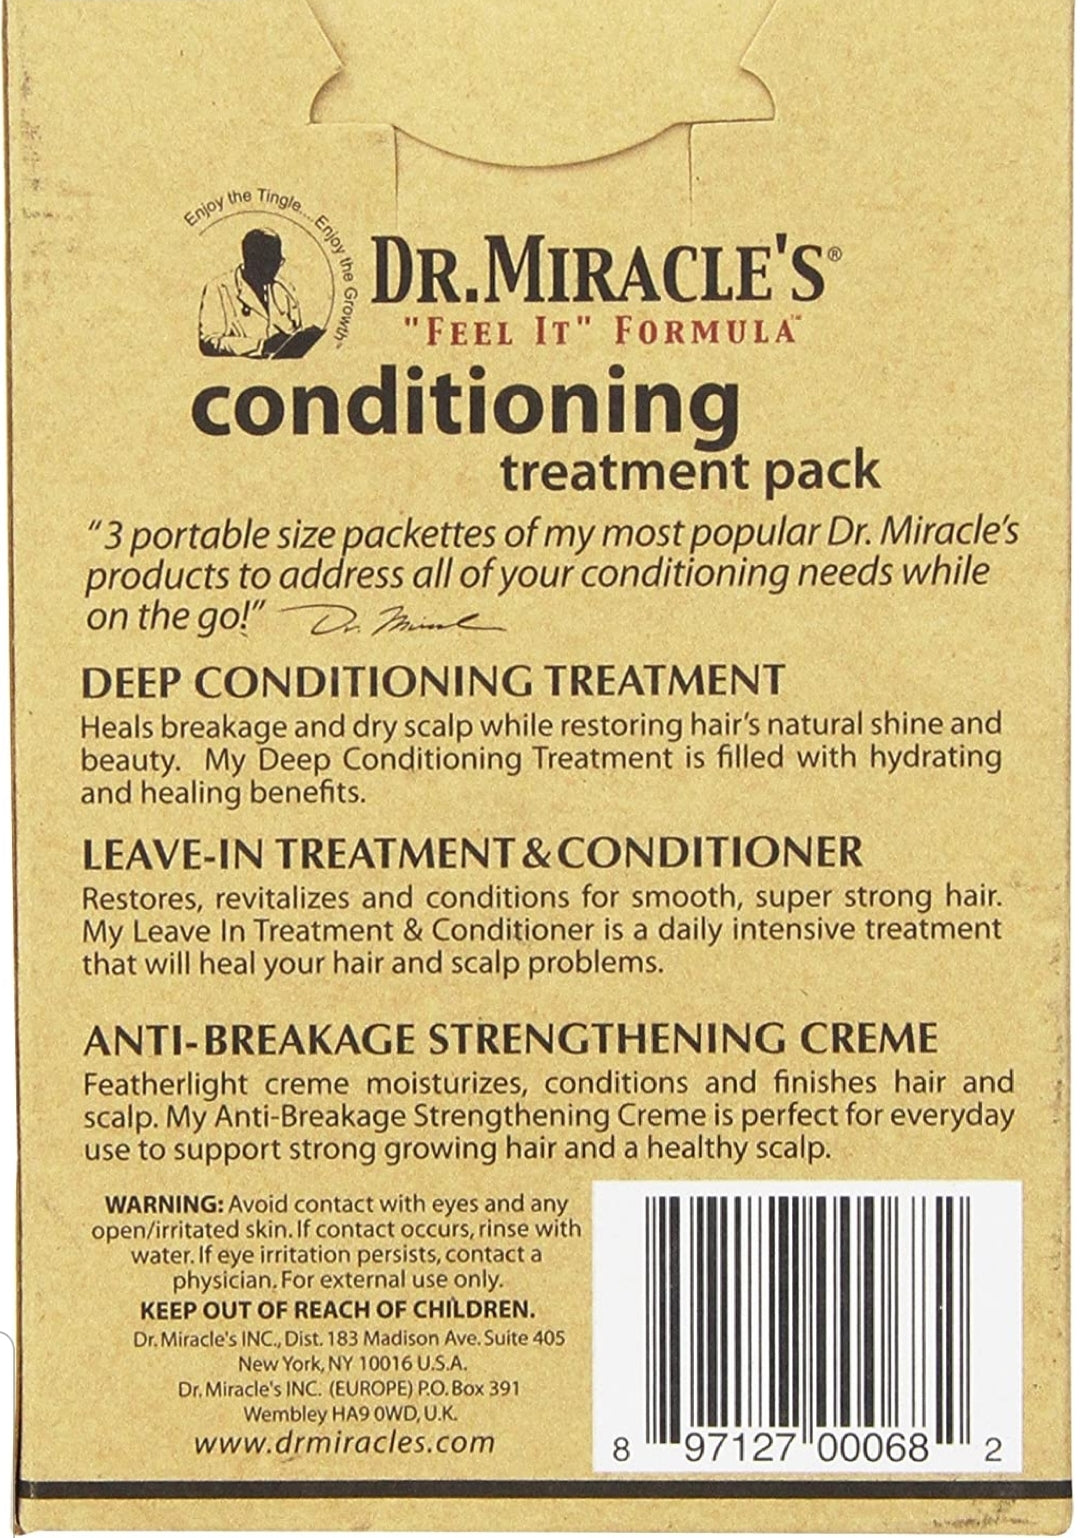 Dr. Miracle- Dee Conditioning Treatment Pack